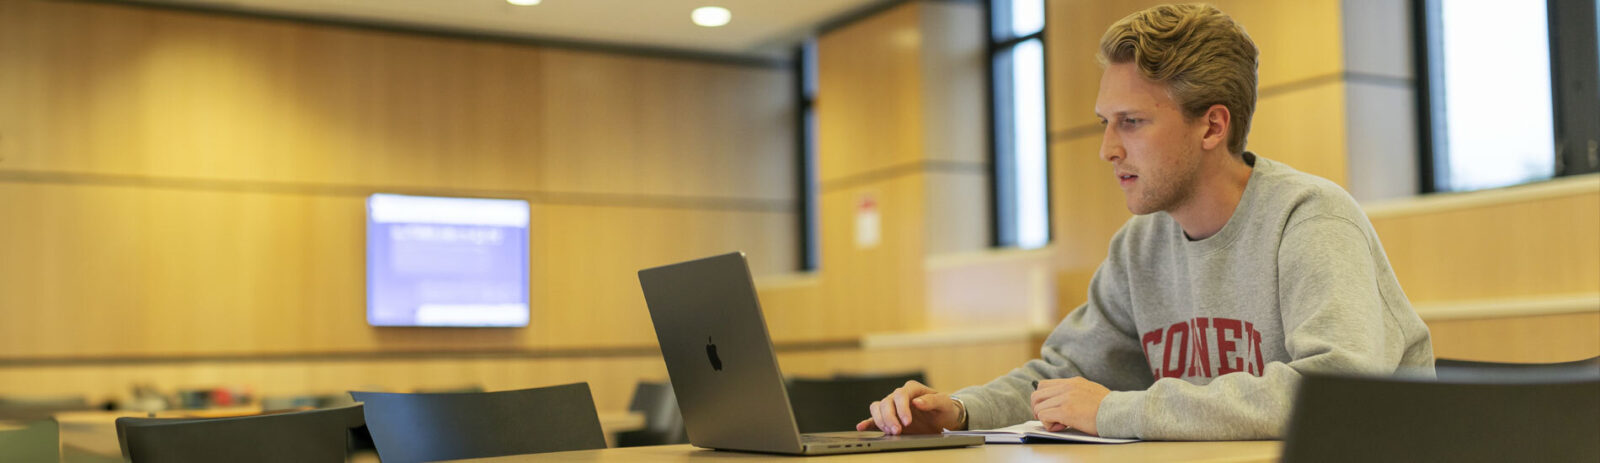 Student in a Cornell sweatshirt sits in front of a laptop at a table.